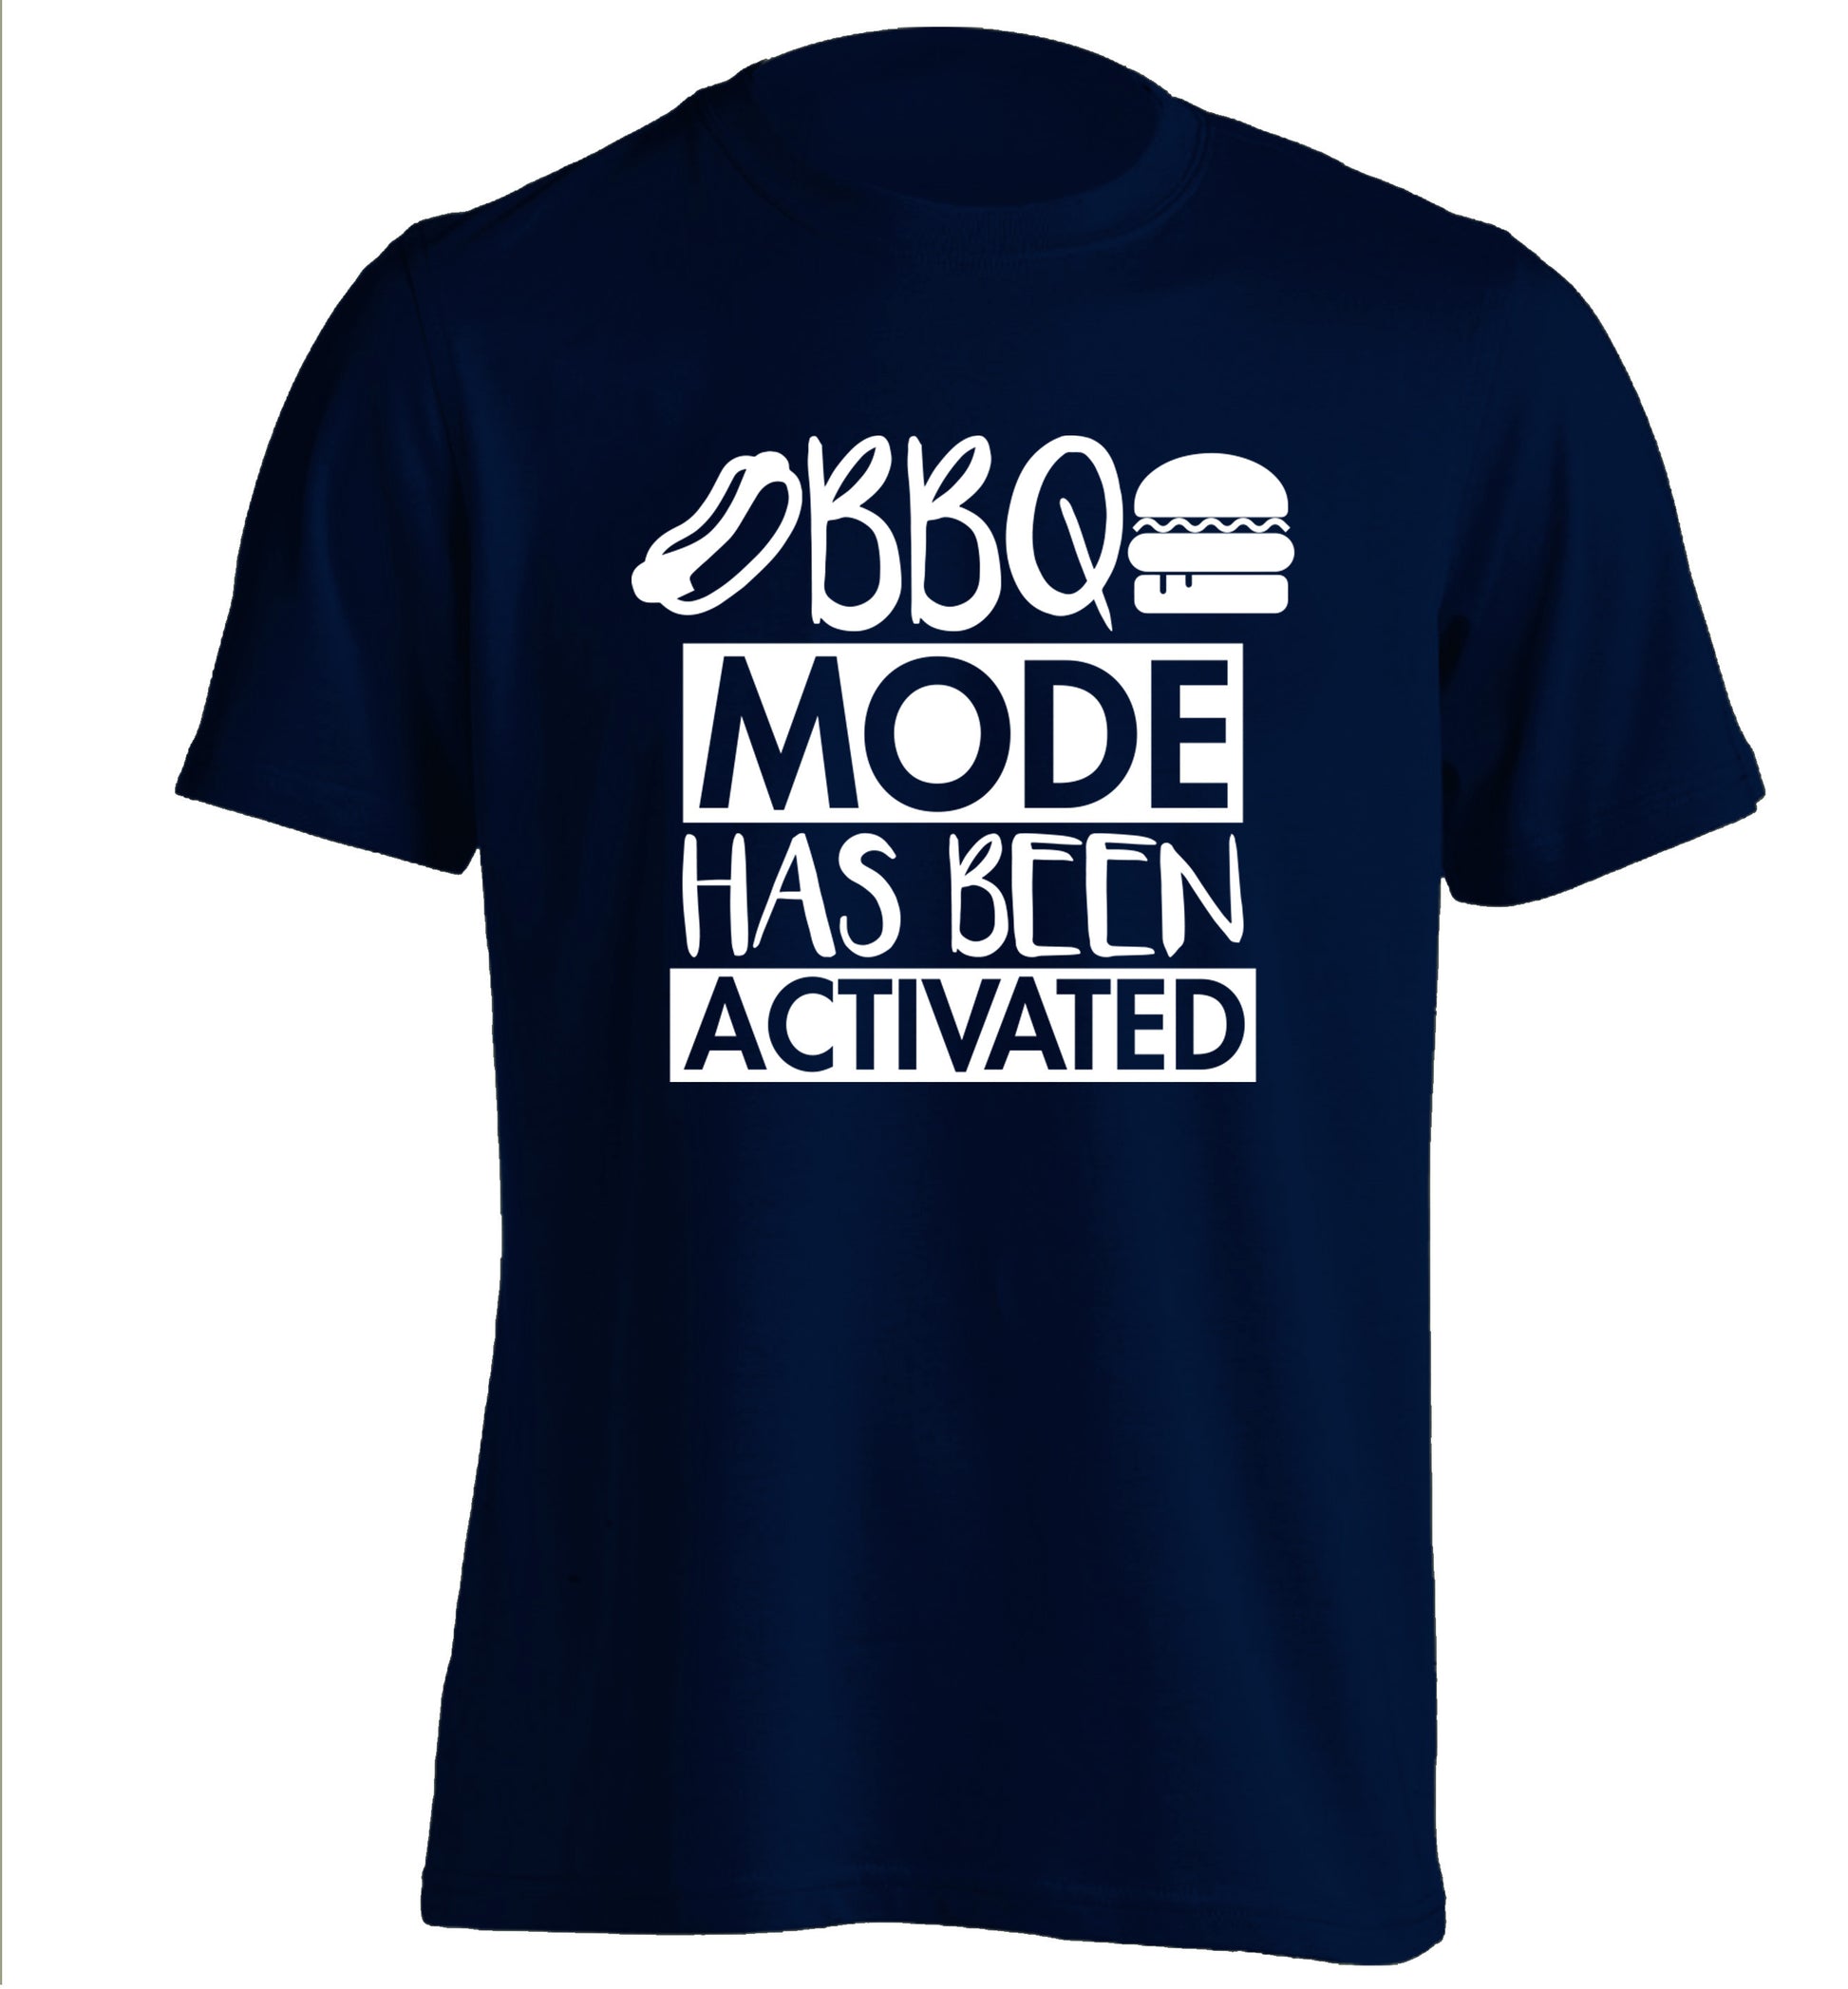 Bbq mode has been activated adults unisex navy Tshirt 2XL